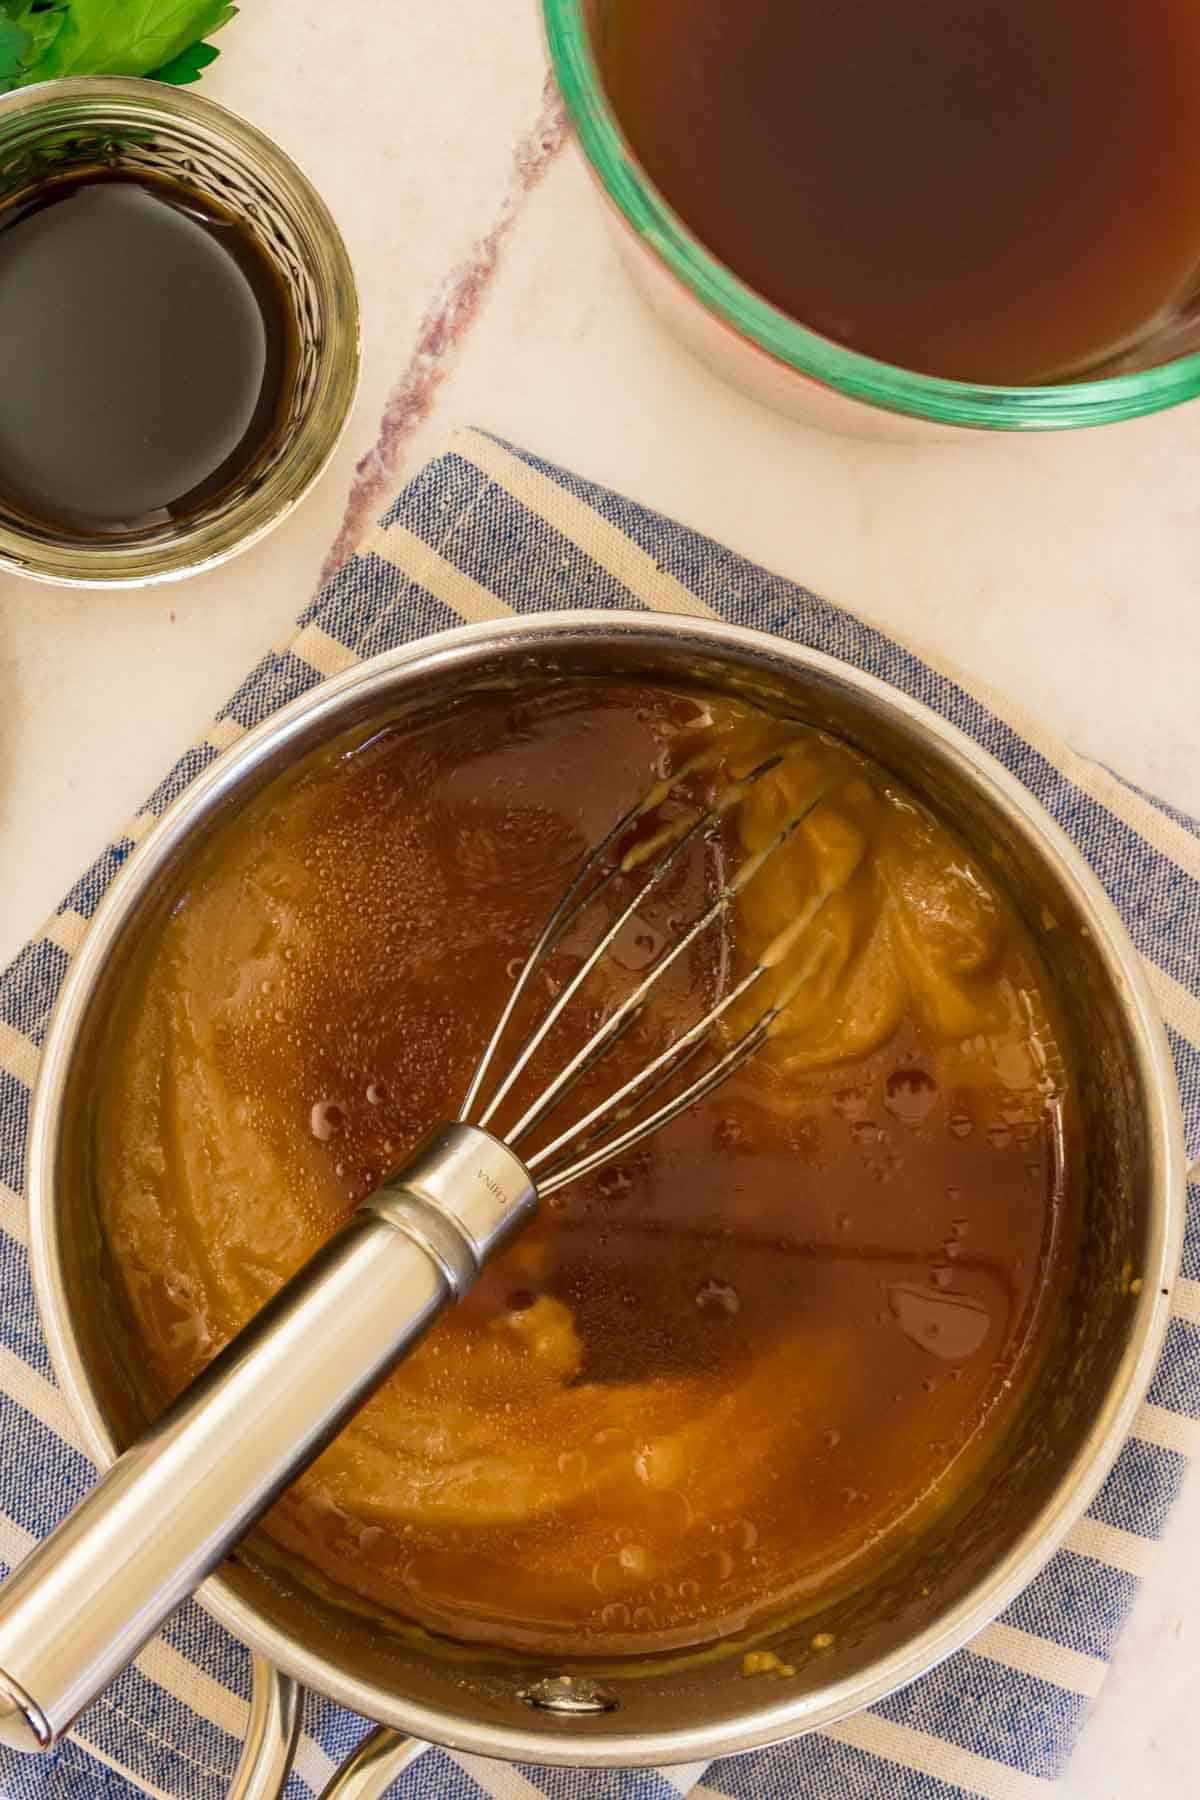 Beef broth is whisked into a saucepan of gluten-free brown gravy.